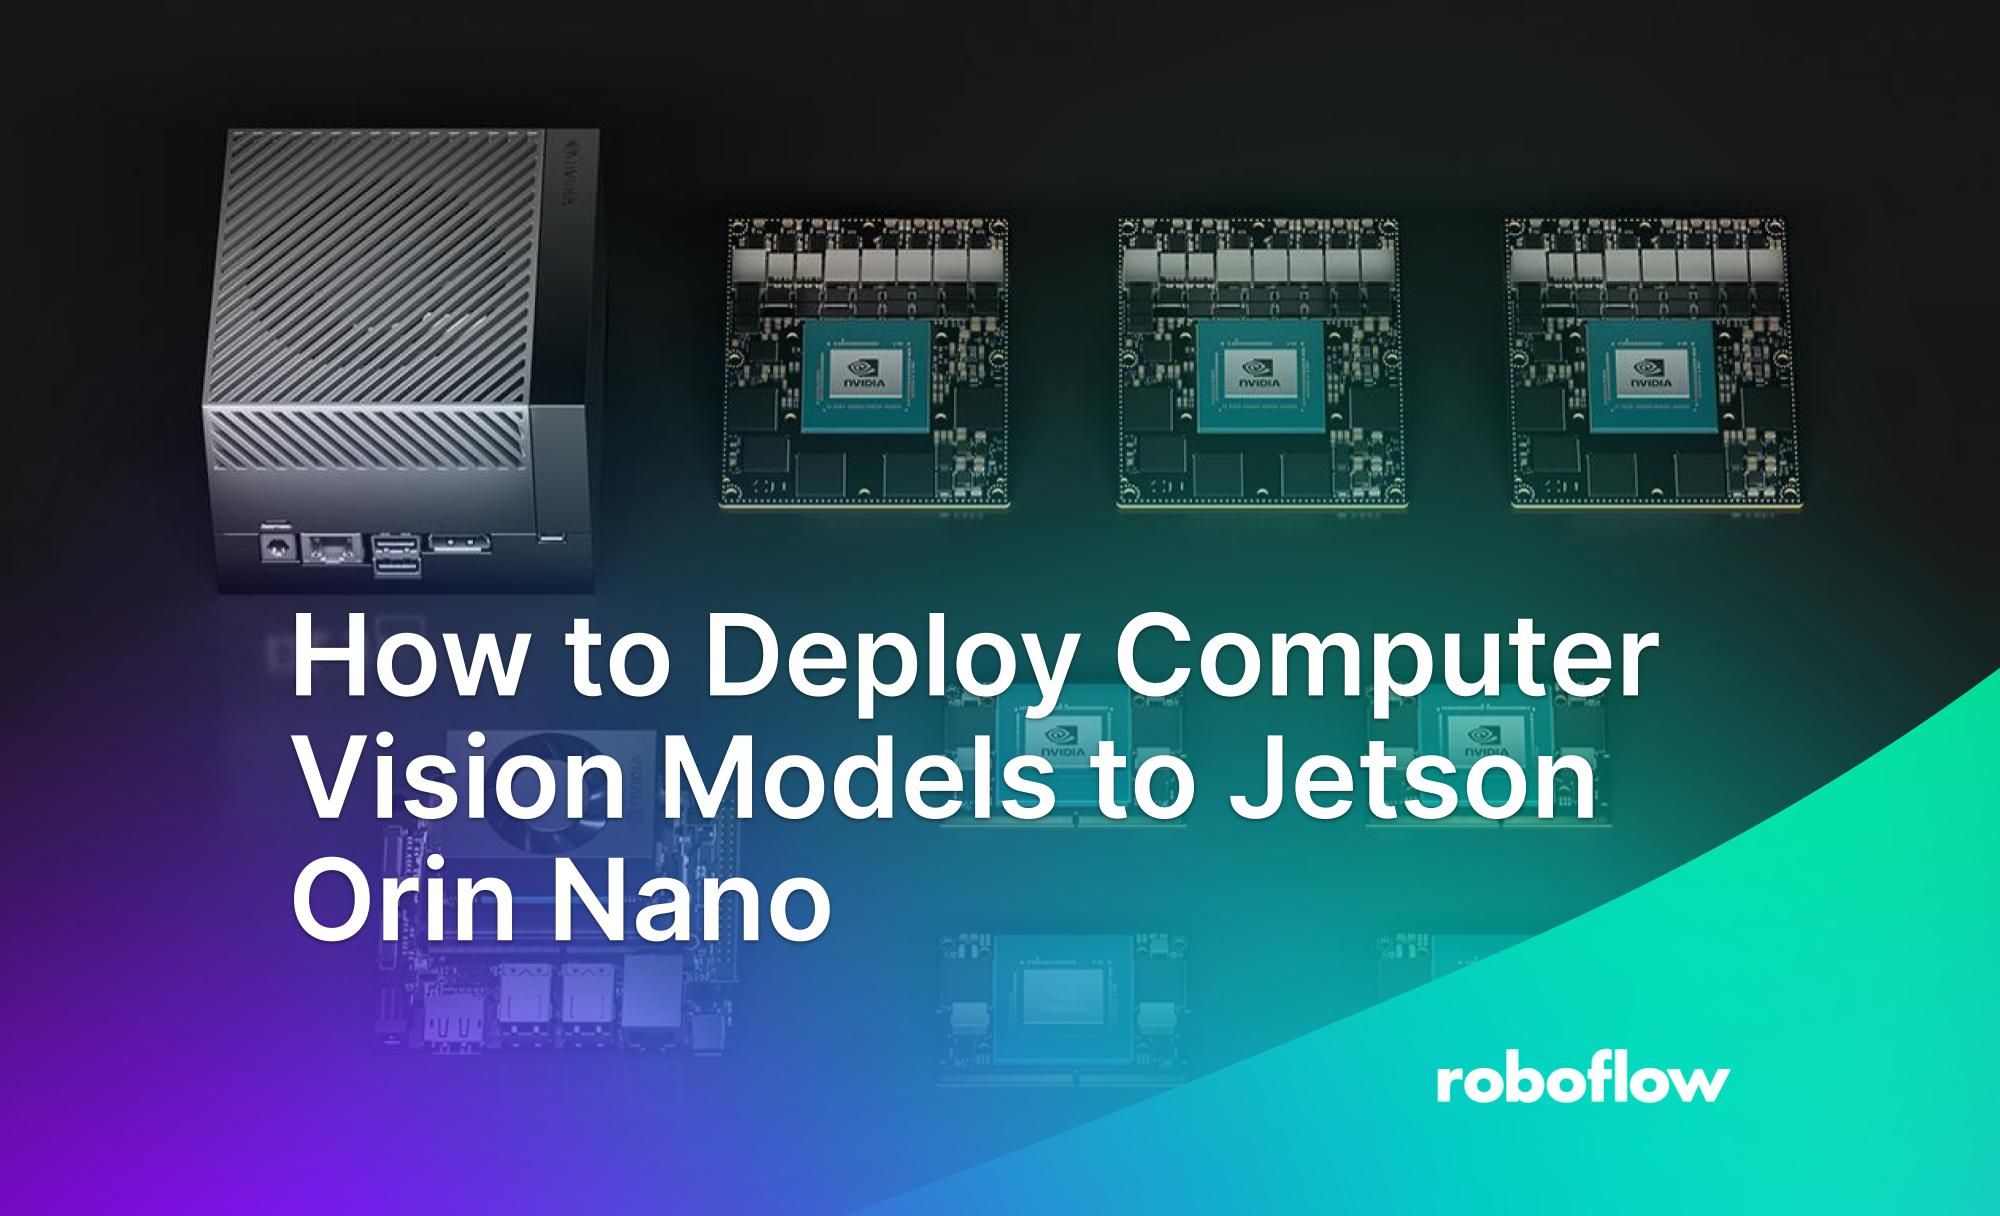 How to Deploy Computer Vision Models to Jetson Orin Nano